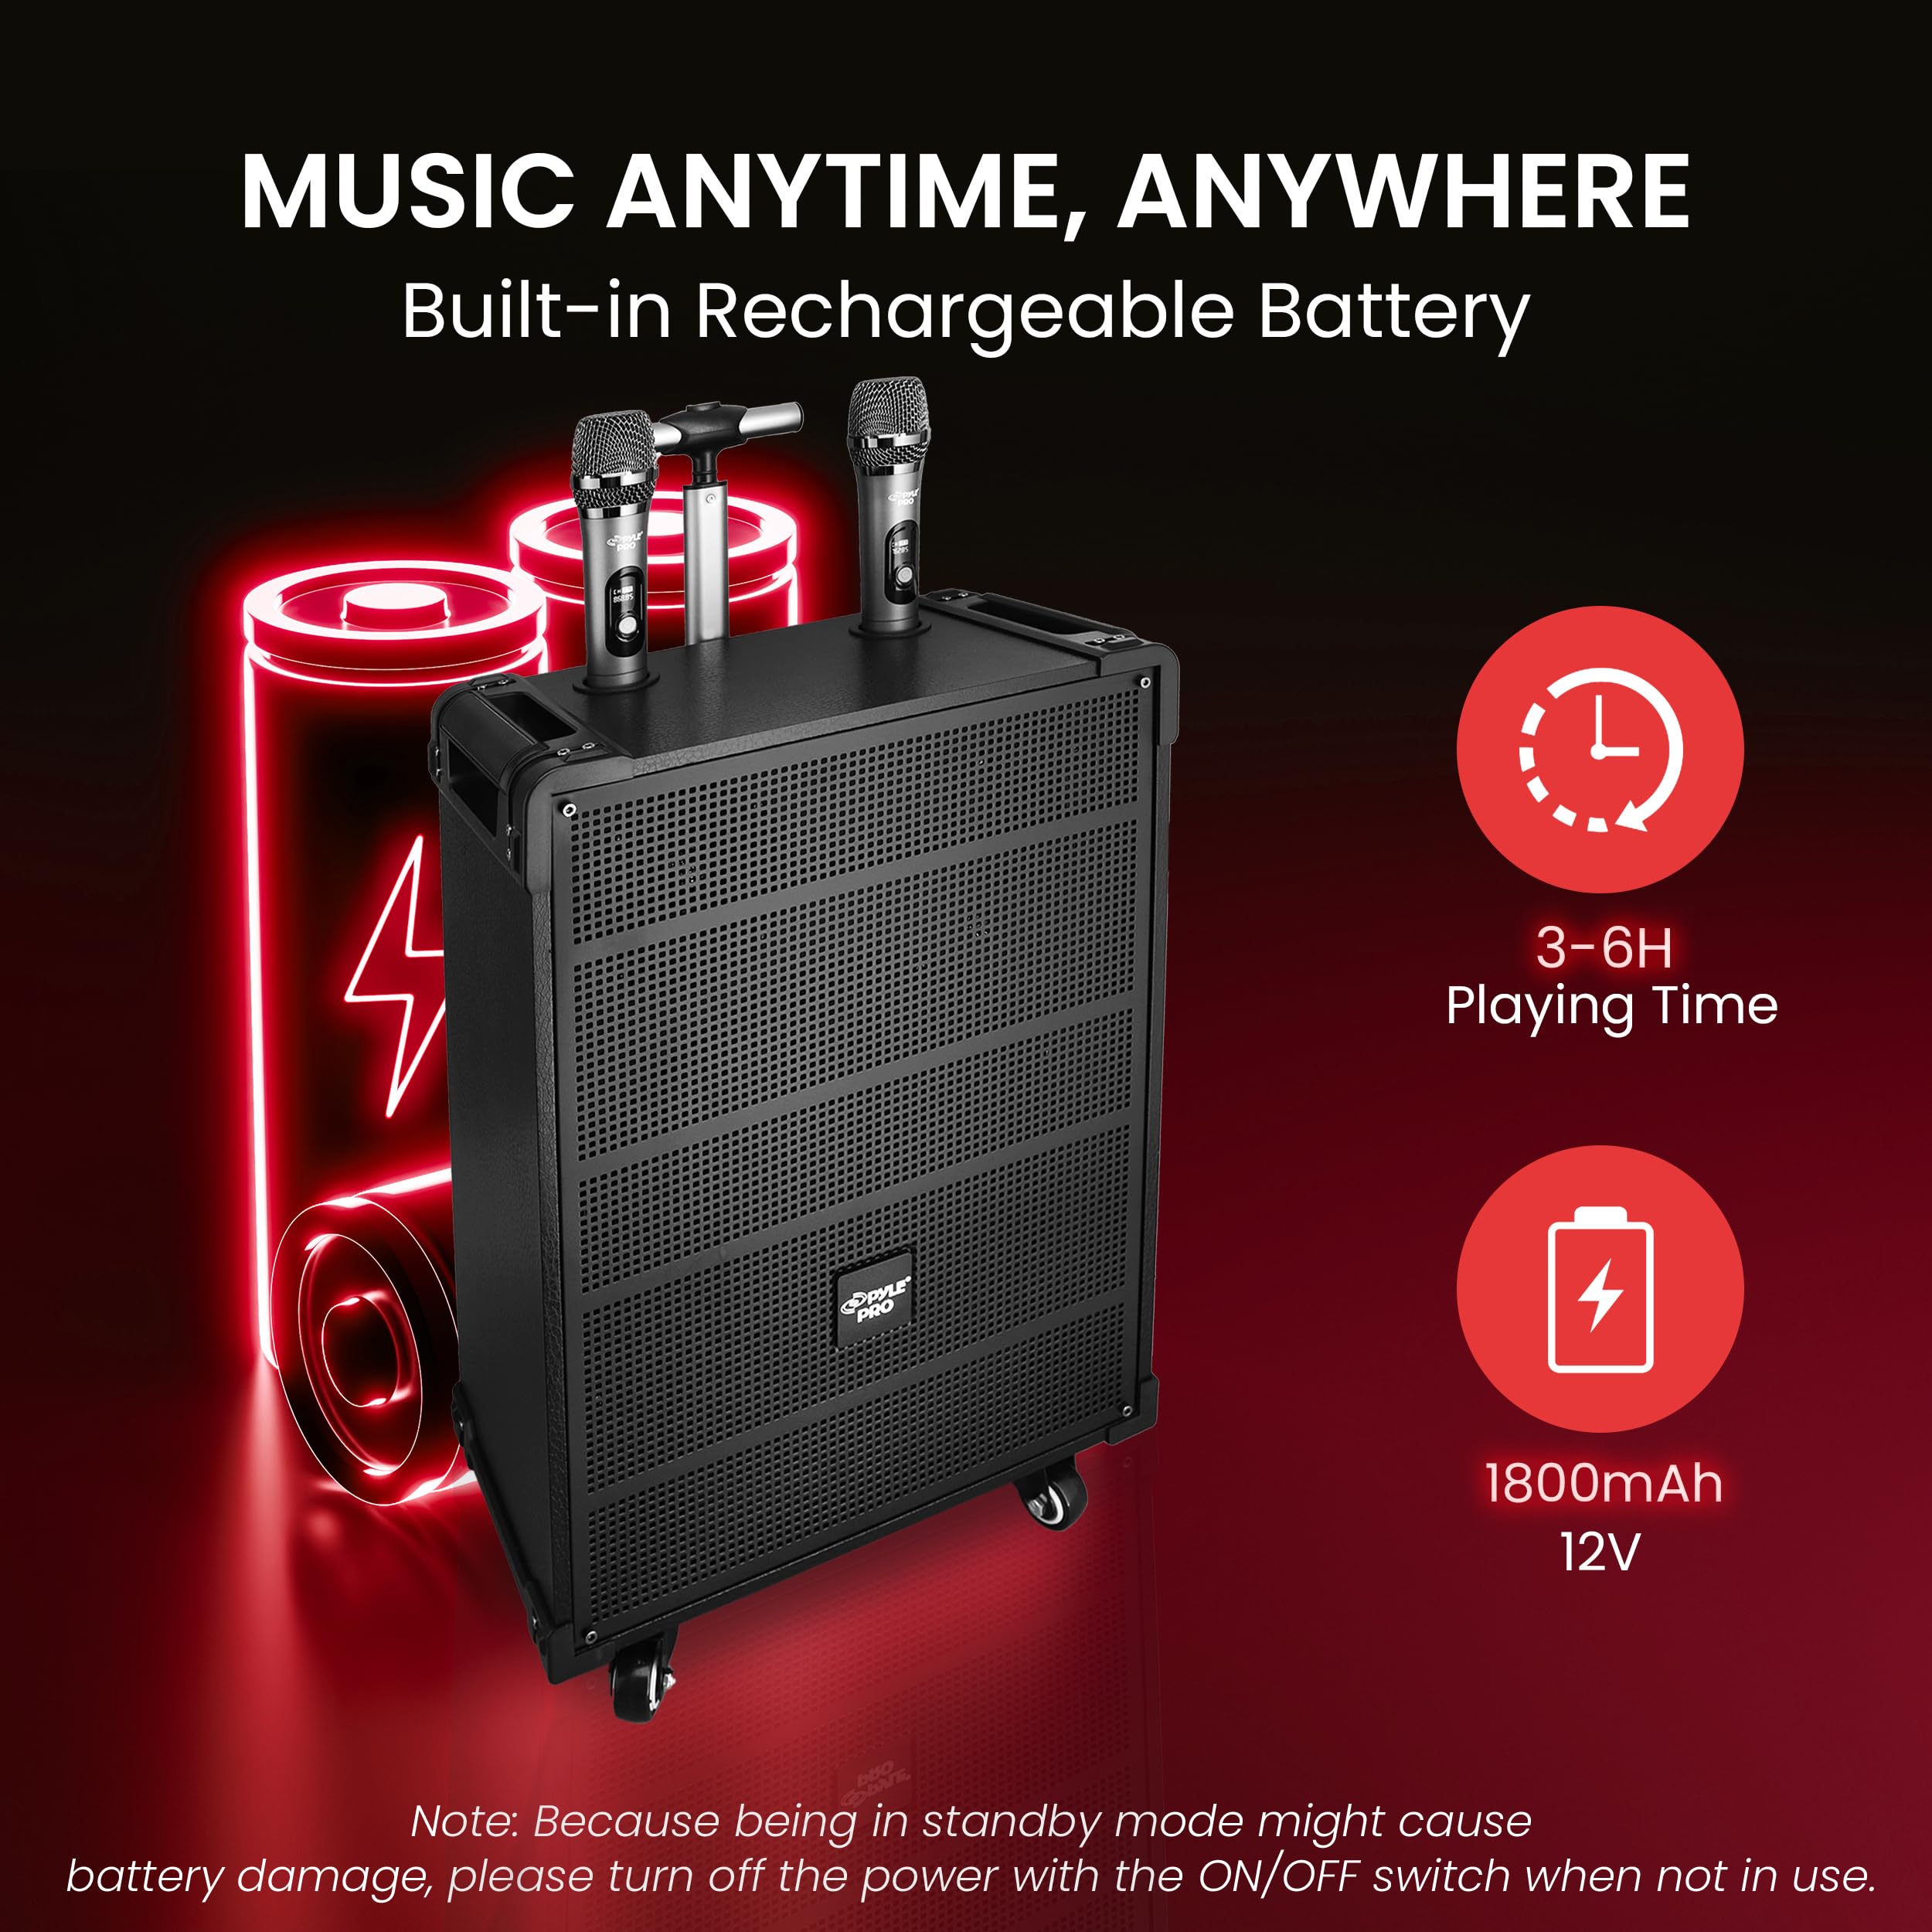 Pyle 10'' Portable Wireless Bluetooth Speaker System - Built-in Rechargeable Battery, Wireless Microphone, USB/Micro SD/FM - 600 Watt FM Radio with Digital LED Display, PWMA1099A